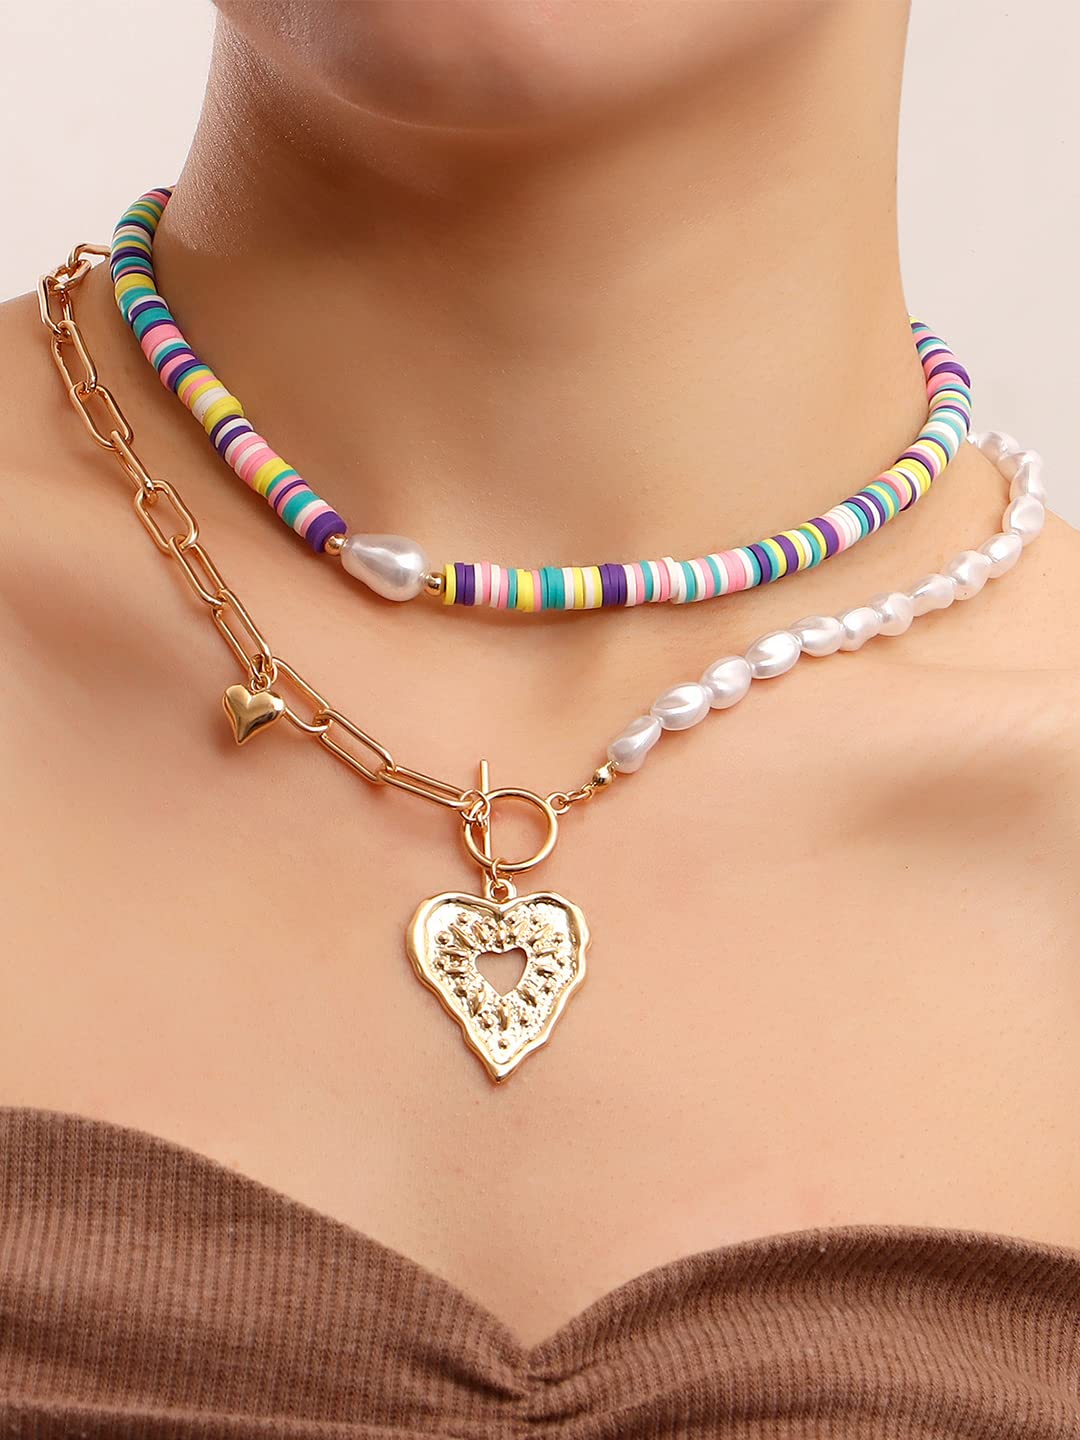 Yellow Chimes Necklace for Women and Girls Fashion Gold Layered Necklace | Western Multilayer Heart Chain Choker Necklace For women | Birthday Gift for Girls & Women Anniversary Gift for Wife